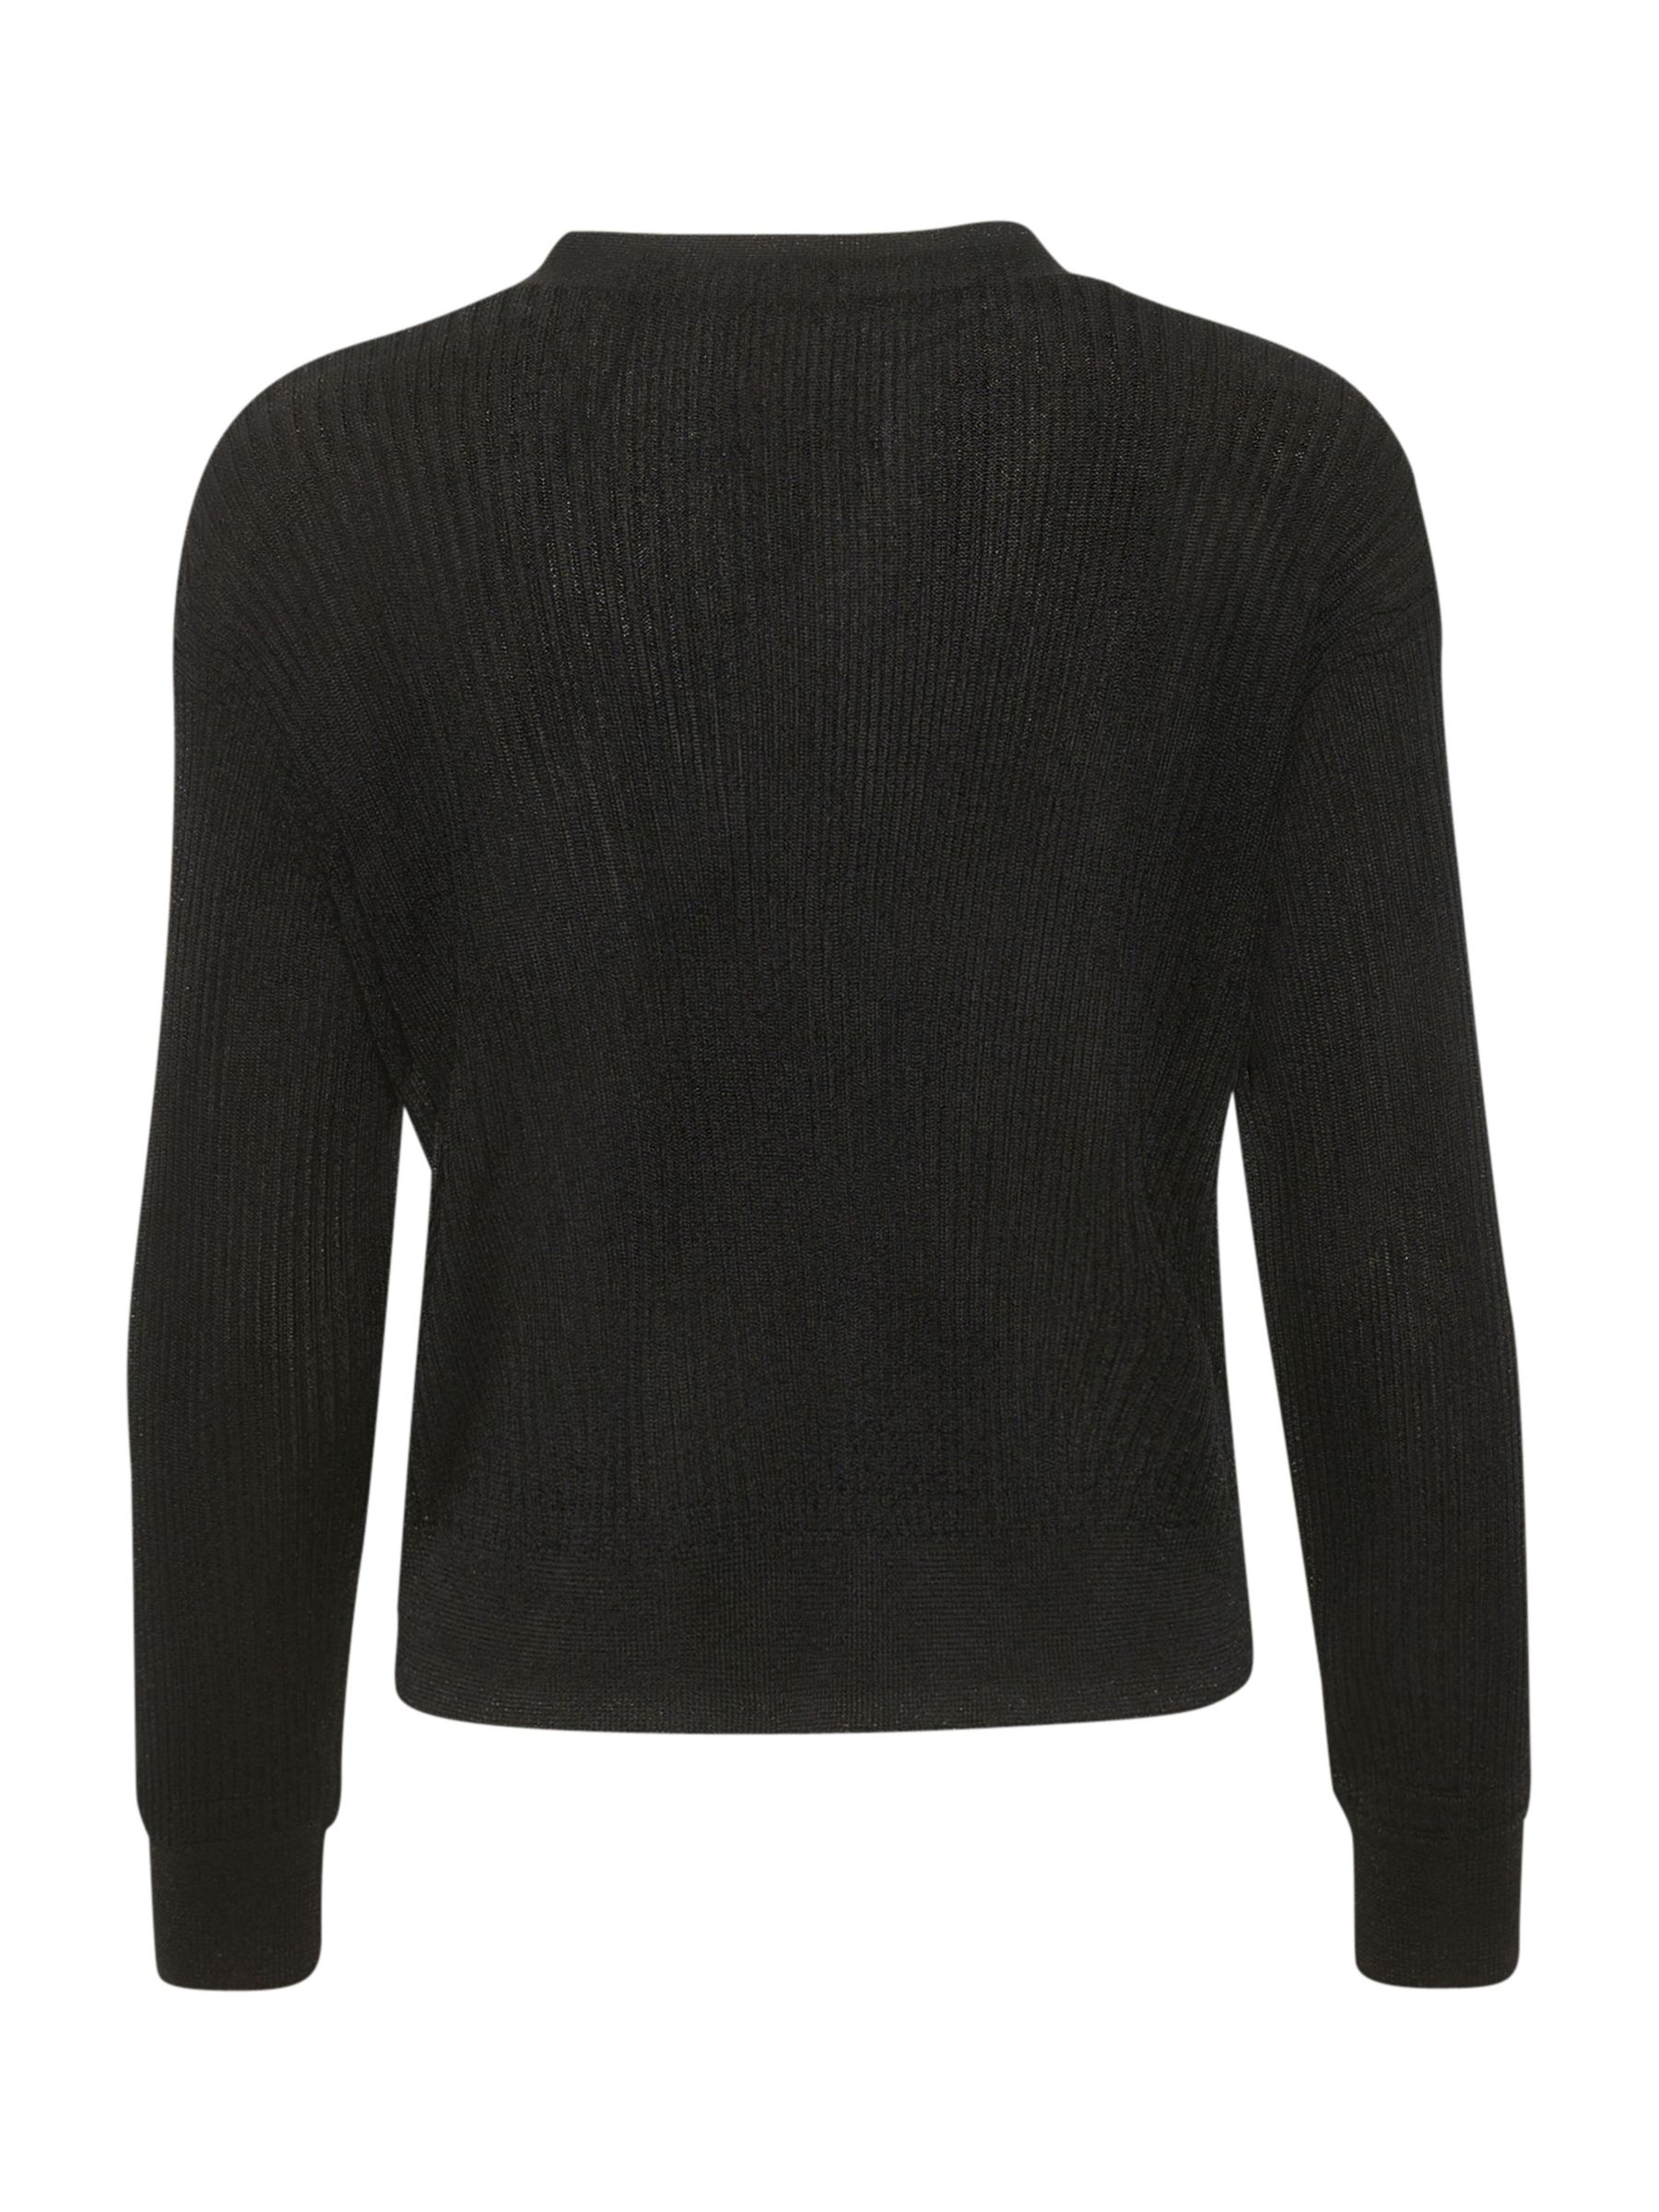 Part Two Delia V-Neck Cropped Cardigan, Black at John Lewis & Partners